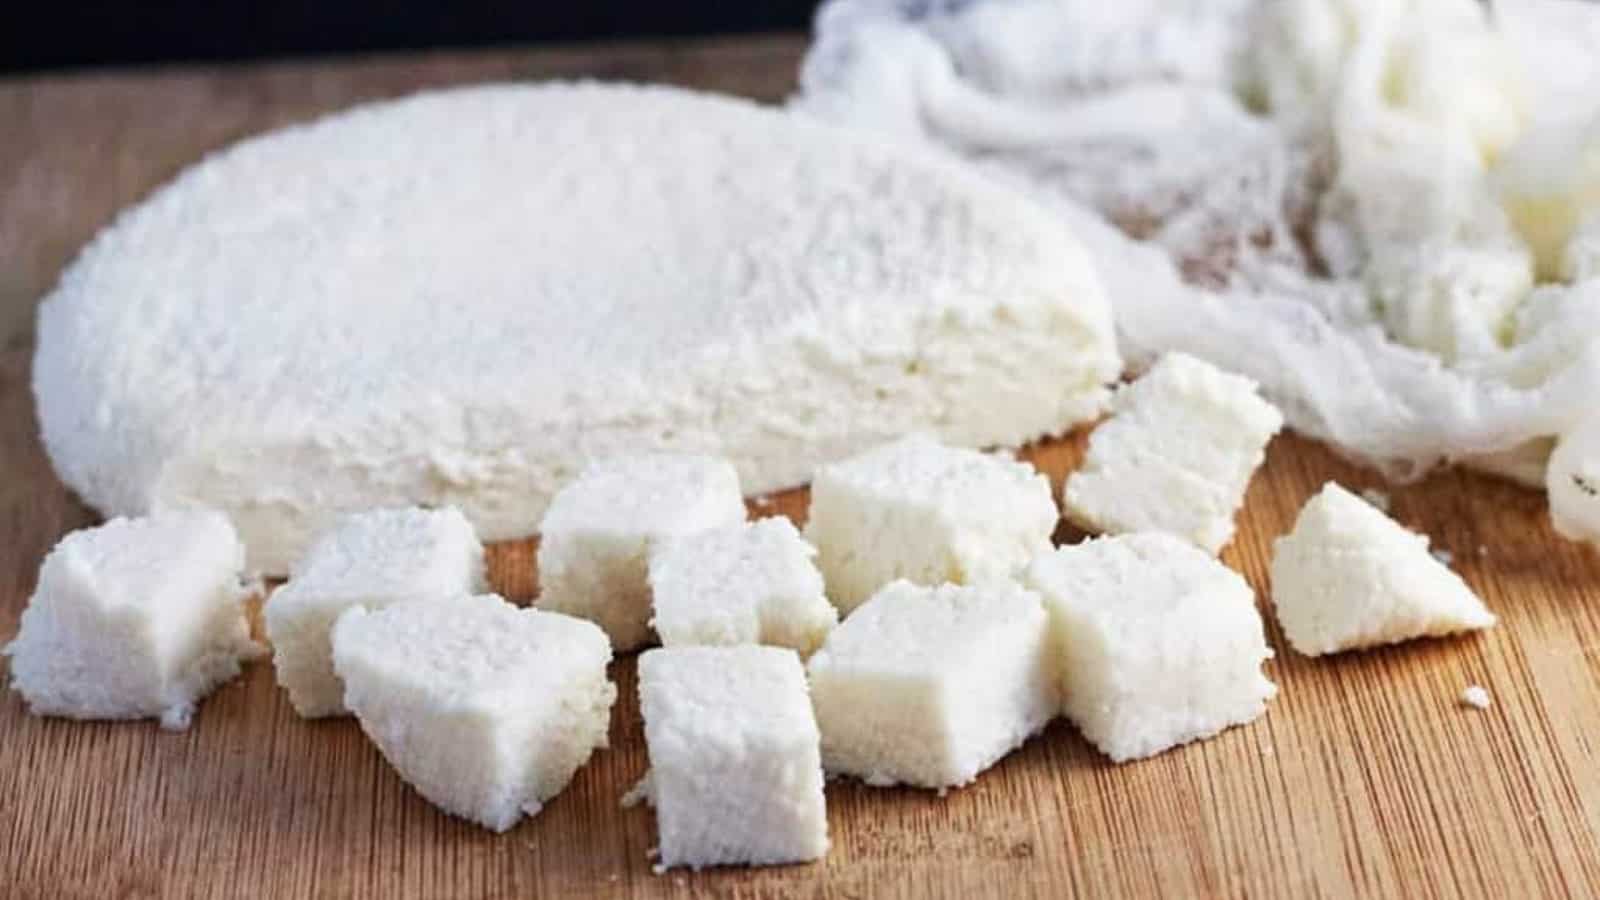 Homemade paneer or Indian farmers' cheese.